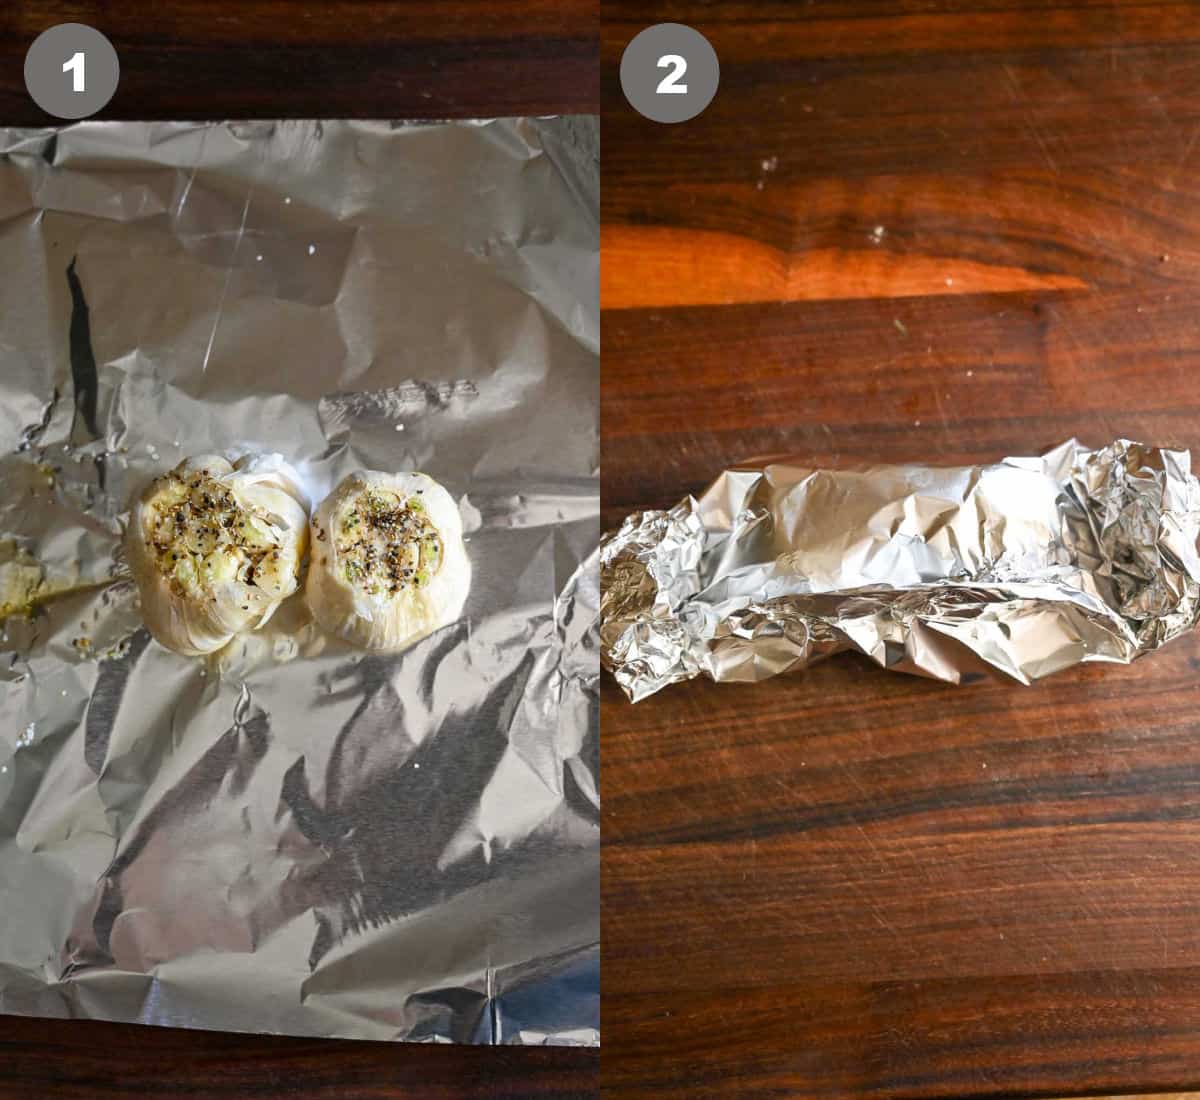 Garlic bulbs on a piece of foil with olive oil and wrapped up.